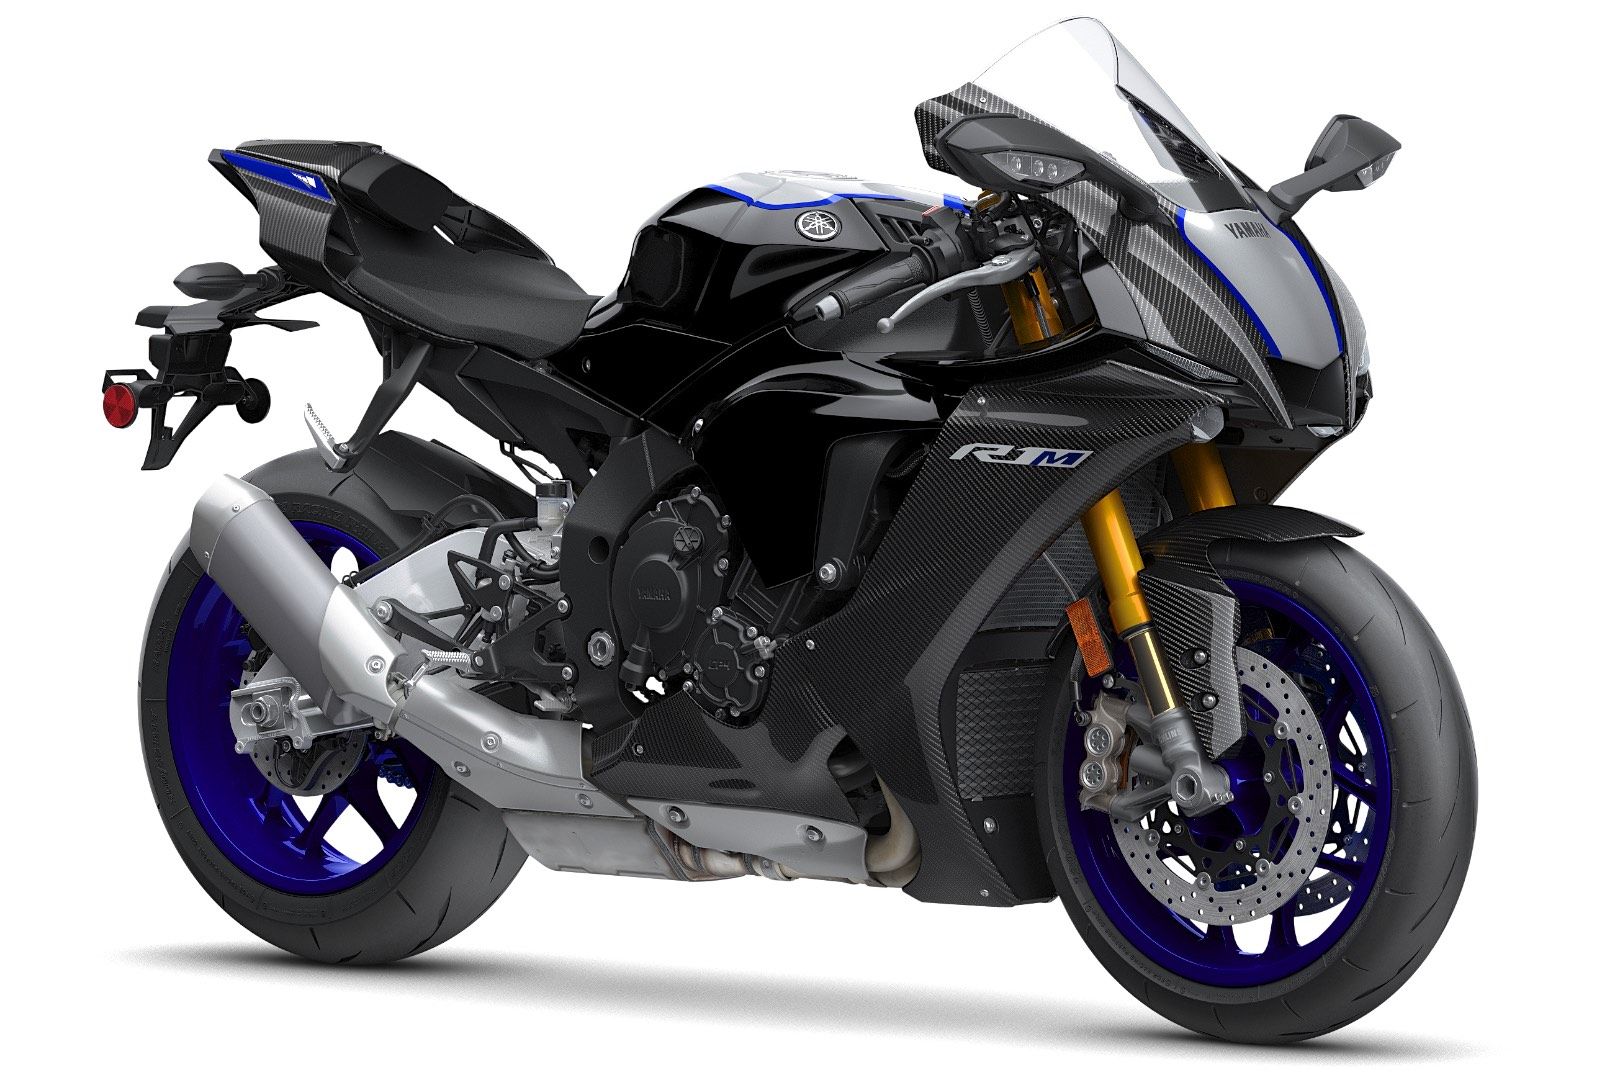 Yamaha YZF R1 And YZF R1M First Look (13 Fast Facts)